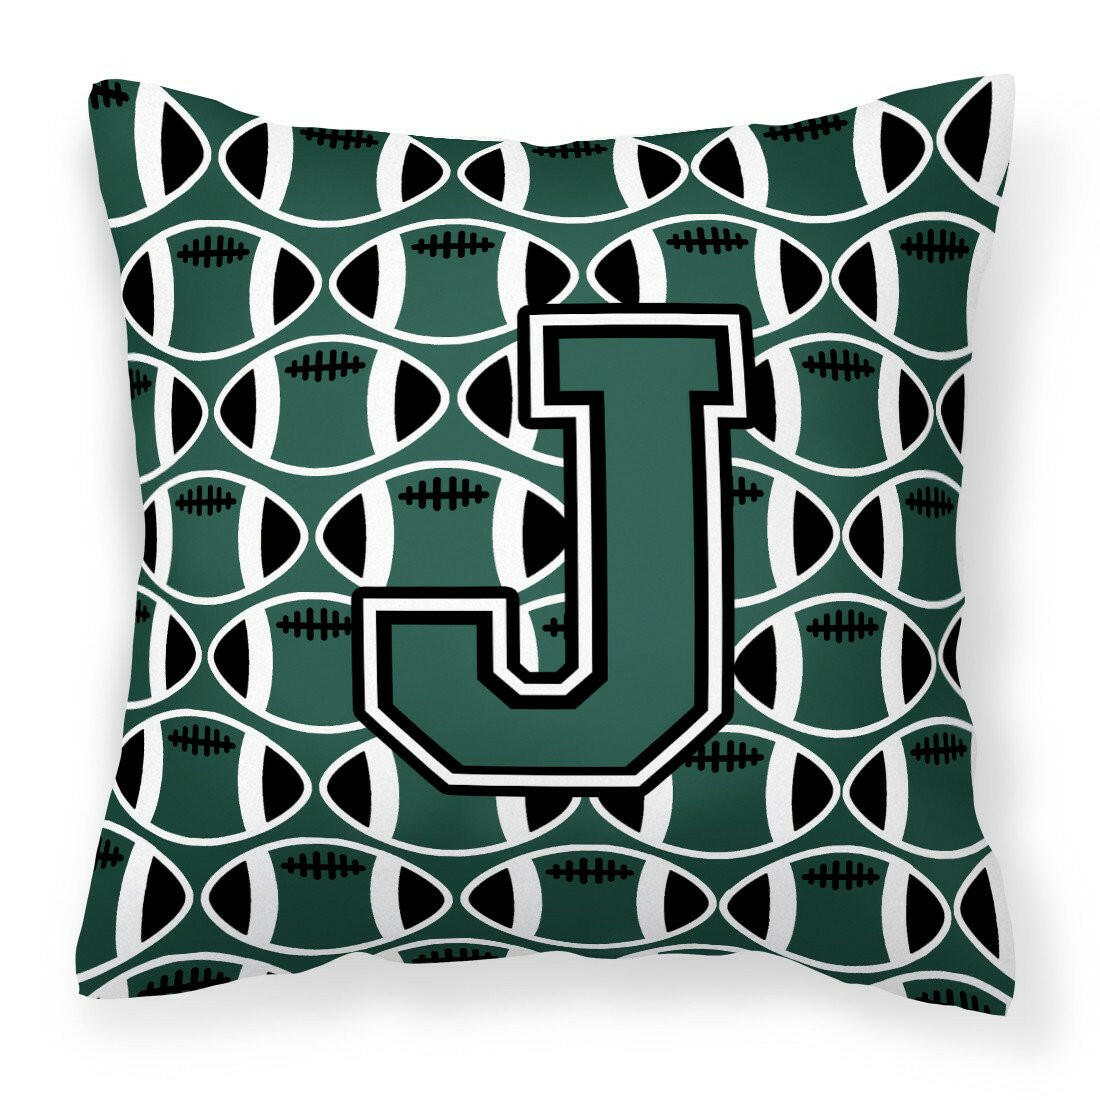 Letter J Football Green and White Fabric Decorative Pillow CJ1071-JPW1414 by Caroline's Treasures